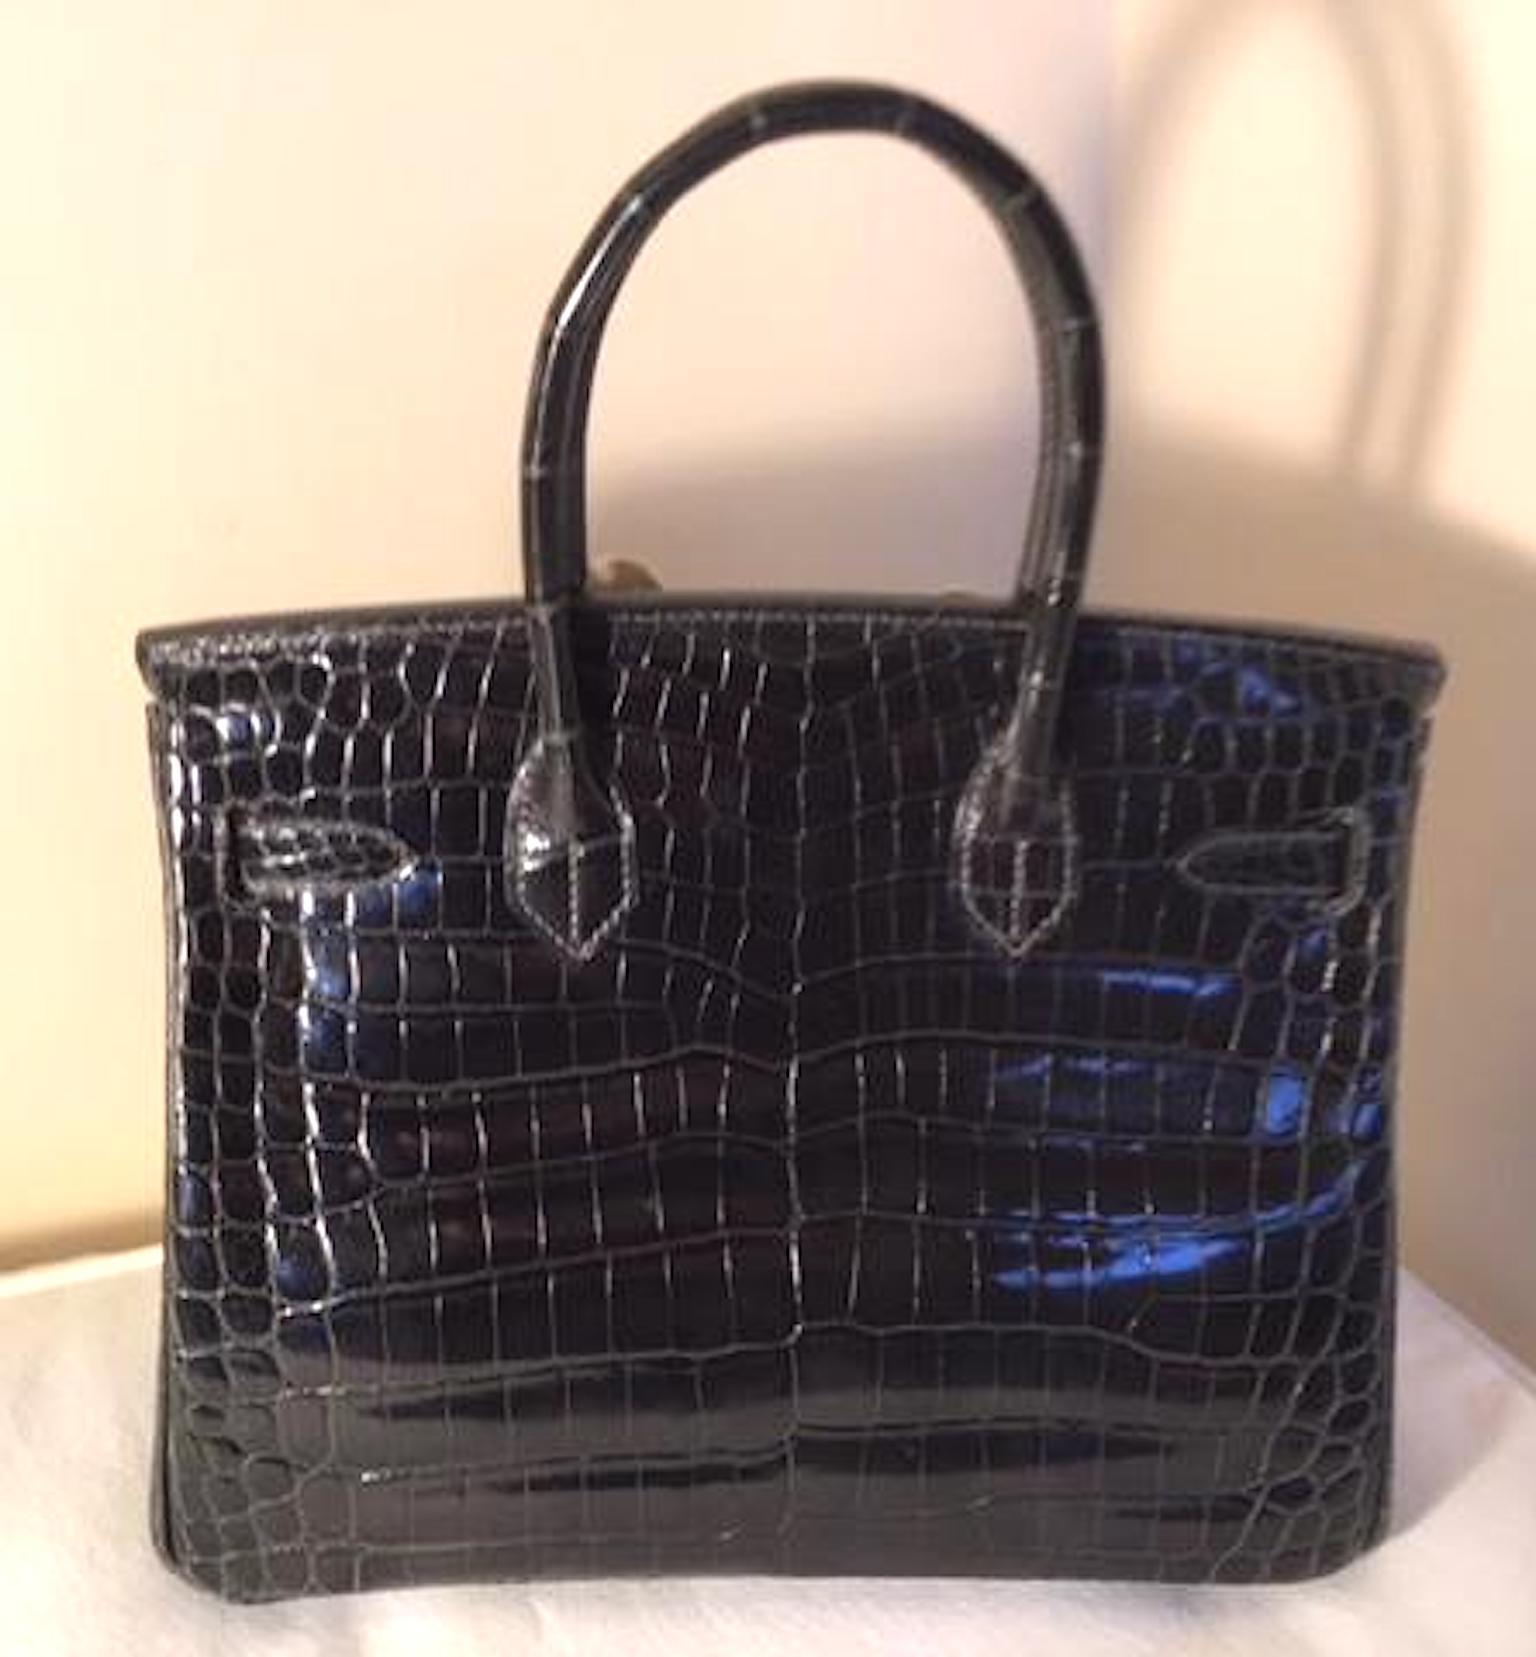 A rare color of shiny graphite is this Niloticus crocodile Hermes Birkin. Only the finest Niloticus crocodile hide is used. It has a larger pattern than the Porosus and has a shiny finish. The bag measures 30 cm x 22 cm x15 cm and is the most